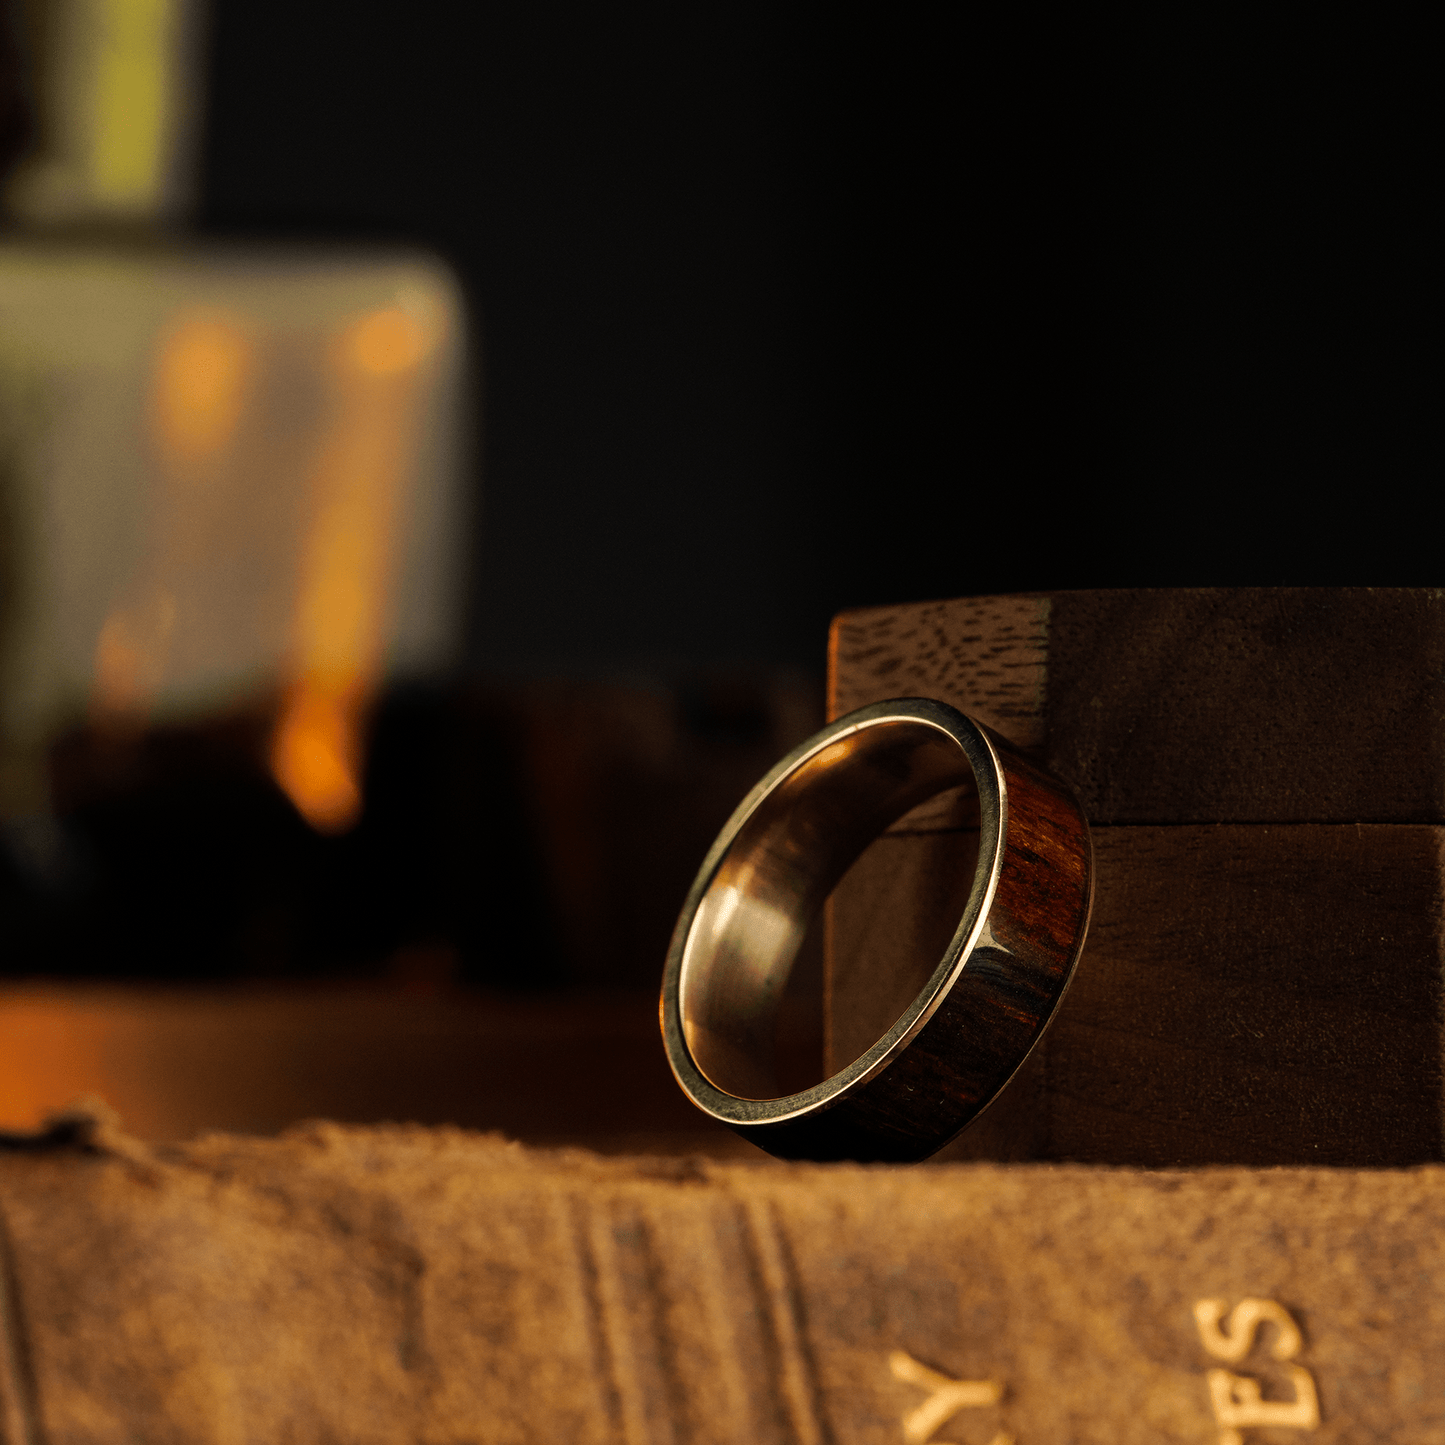 The Woz - Men's Wedding Rings - Manly Bands